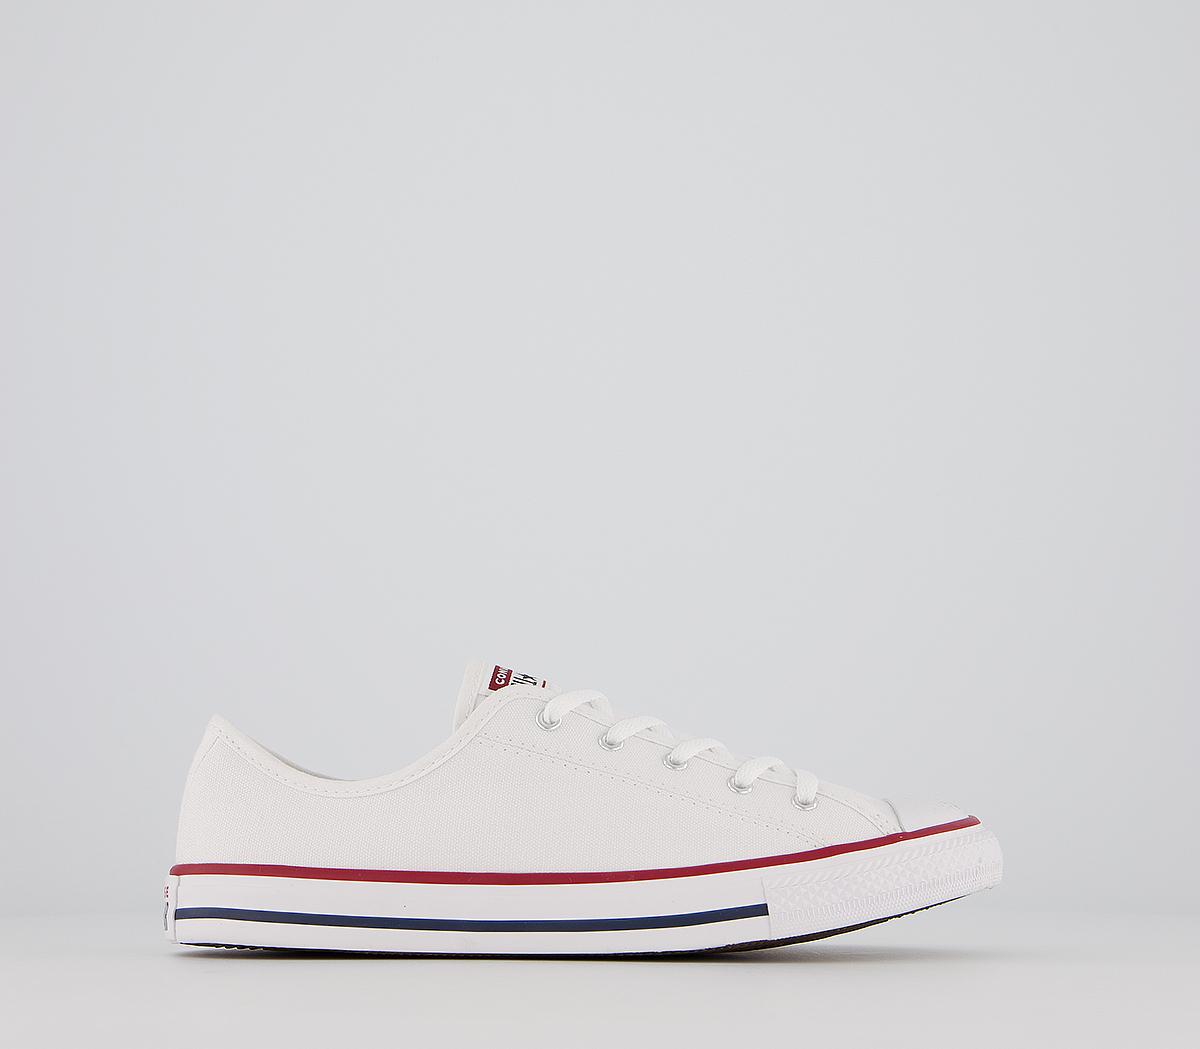 ConverseAll Star Dainty TrainersWhite Red Blue